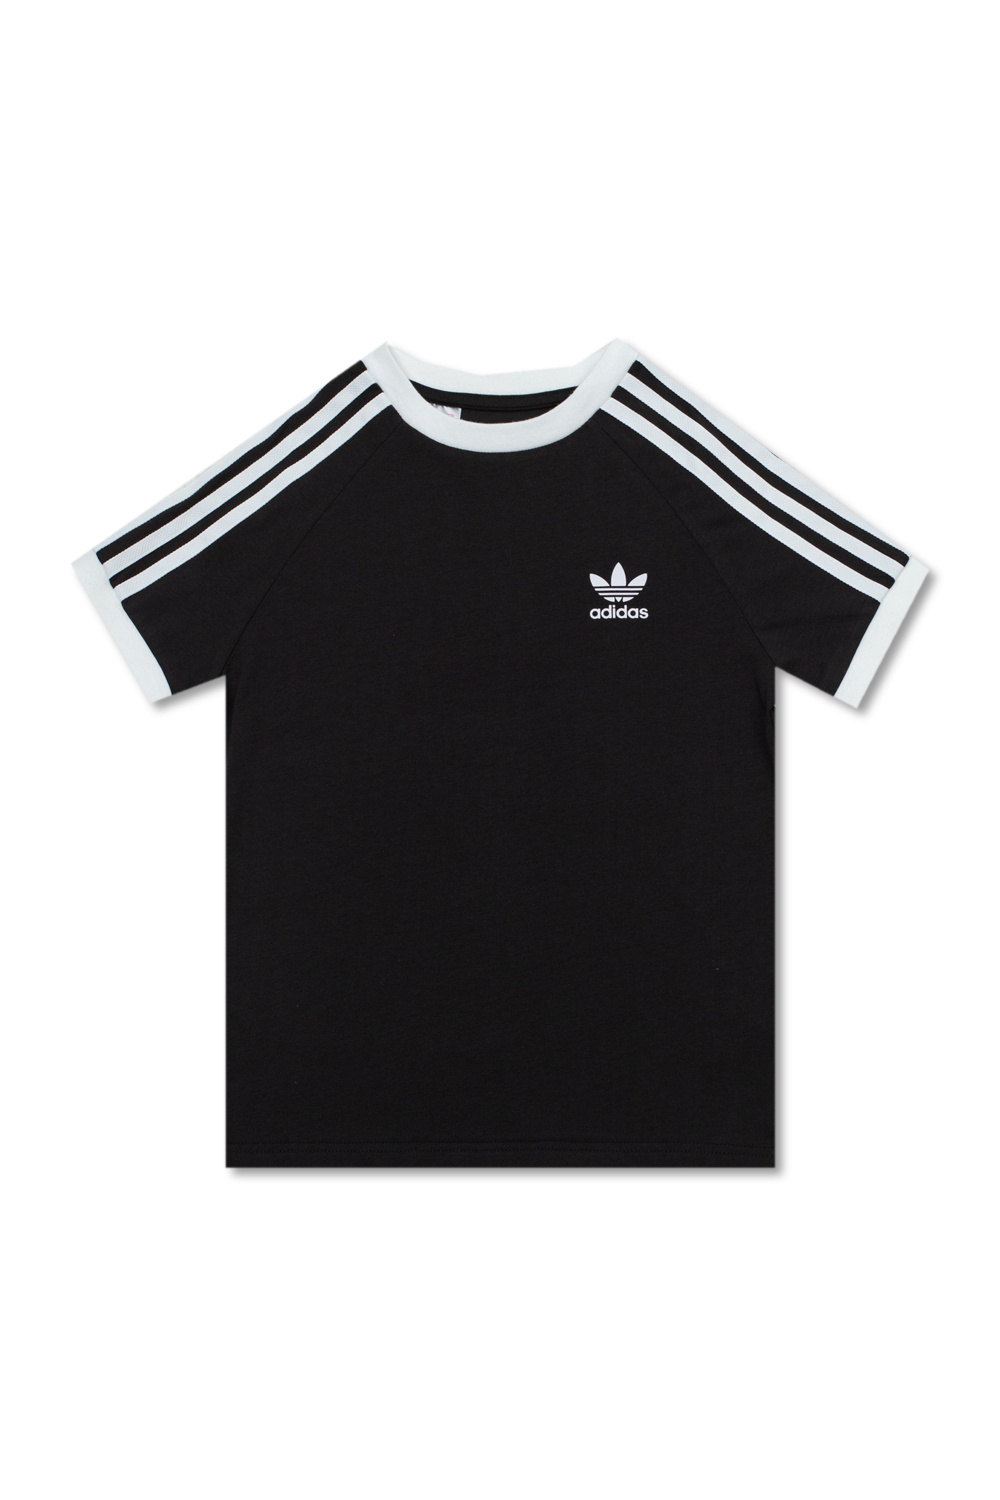 ADIDAS Kids what is nmd stand for girls in black